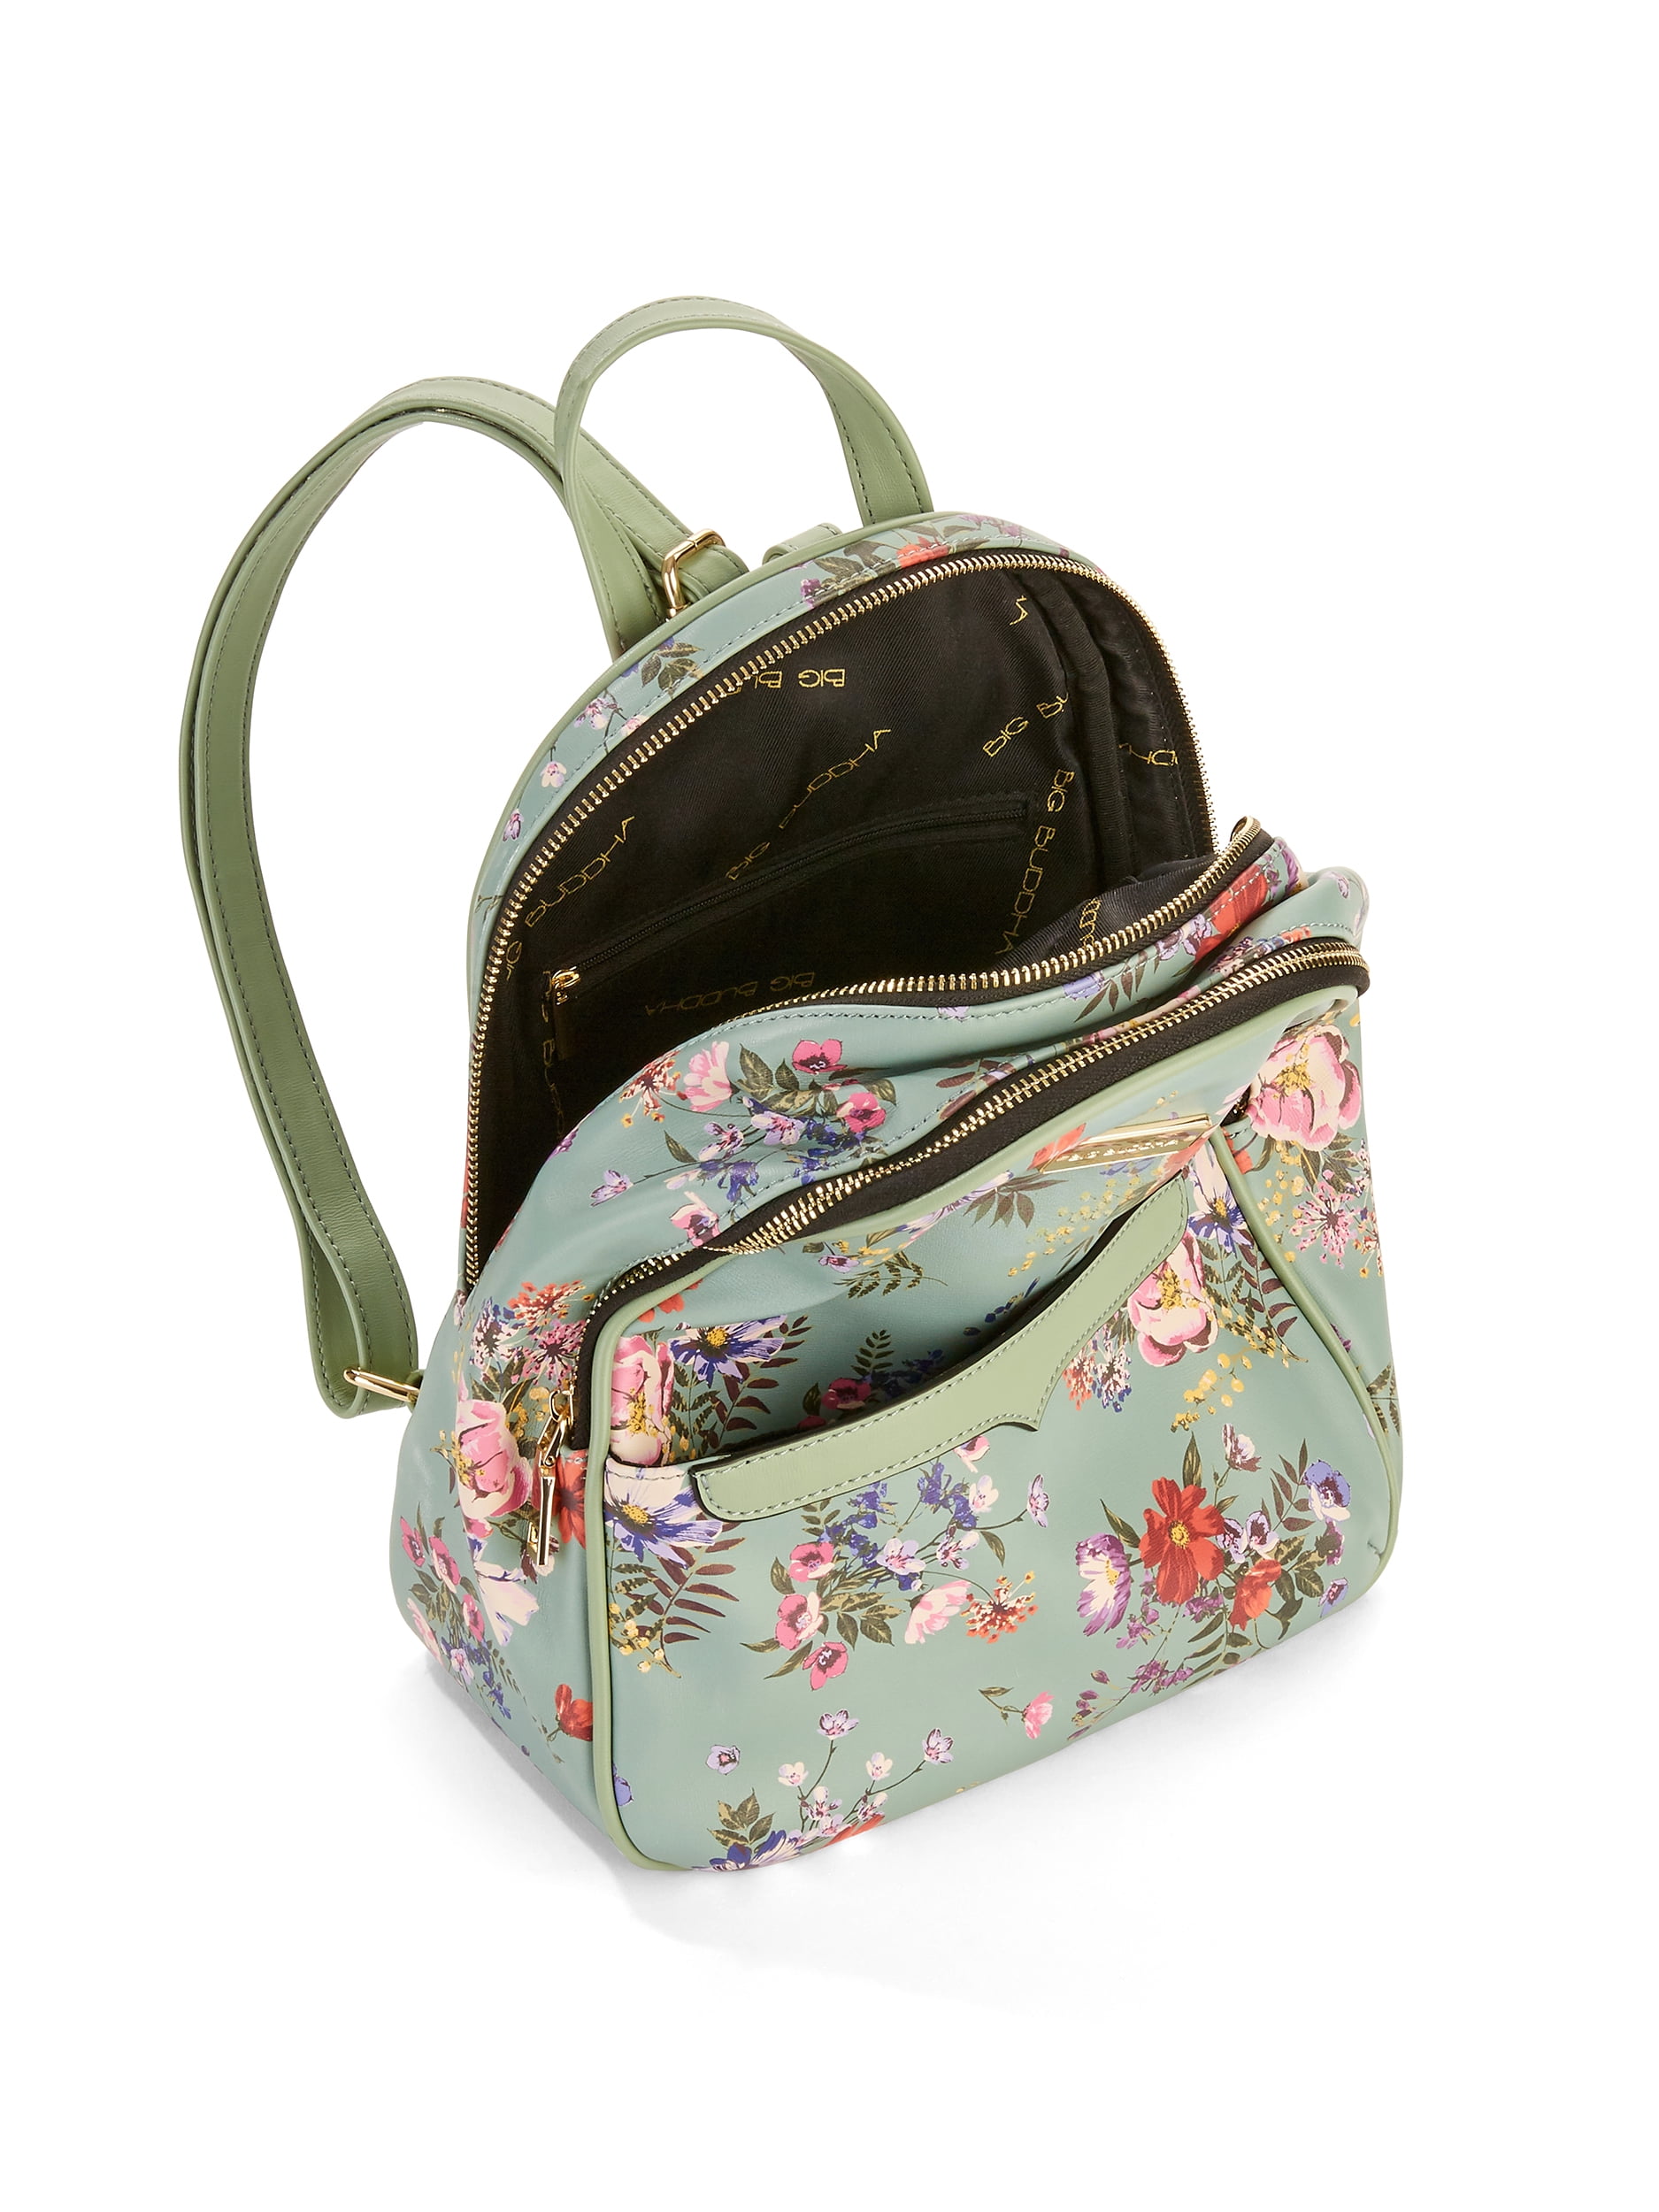 Lotus and Firefly Waxed Canvas Backpack - Canvas Bag - Backpack purse -  Screen Printed - Floral Fabric - Water Resistant Bag